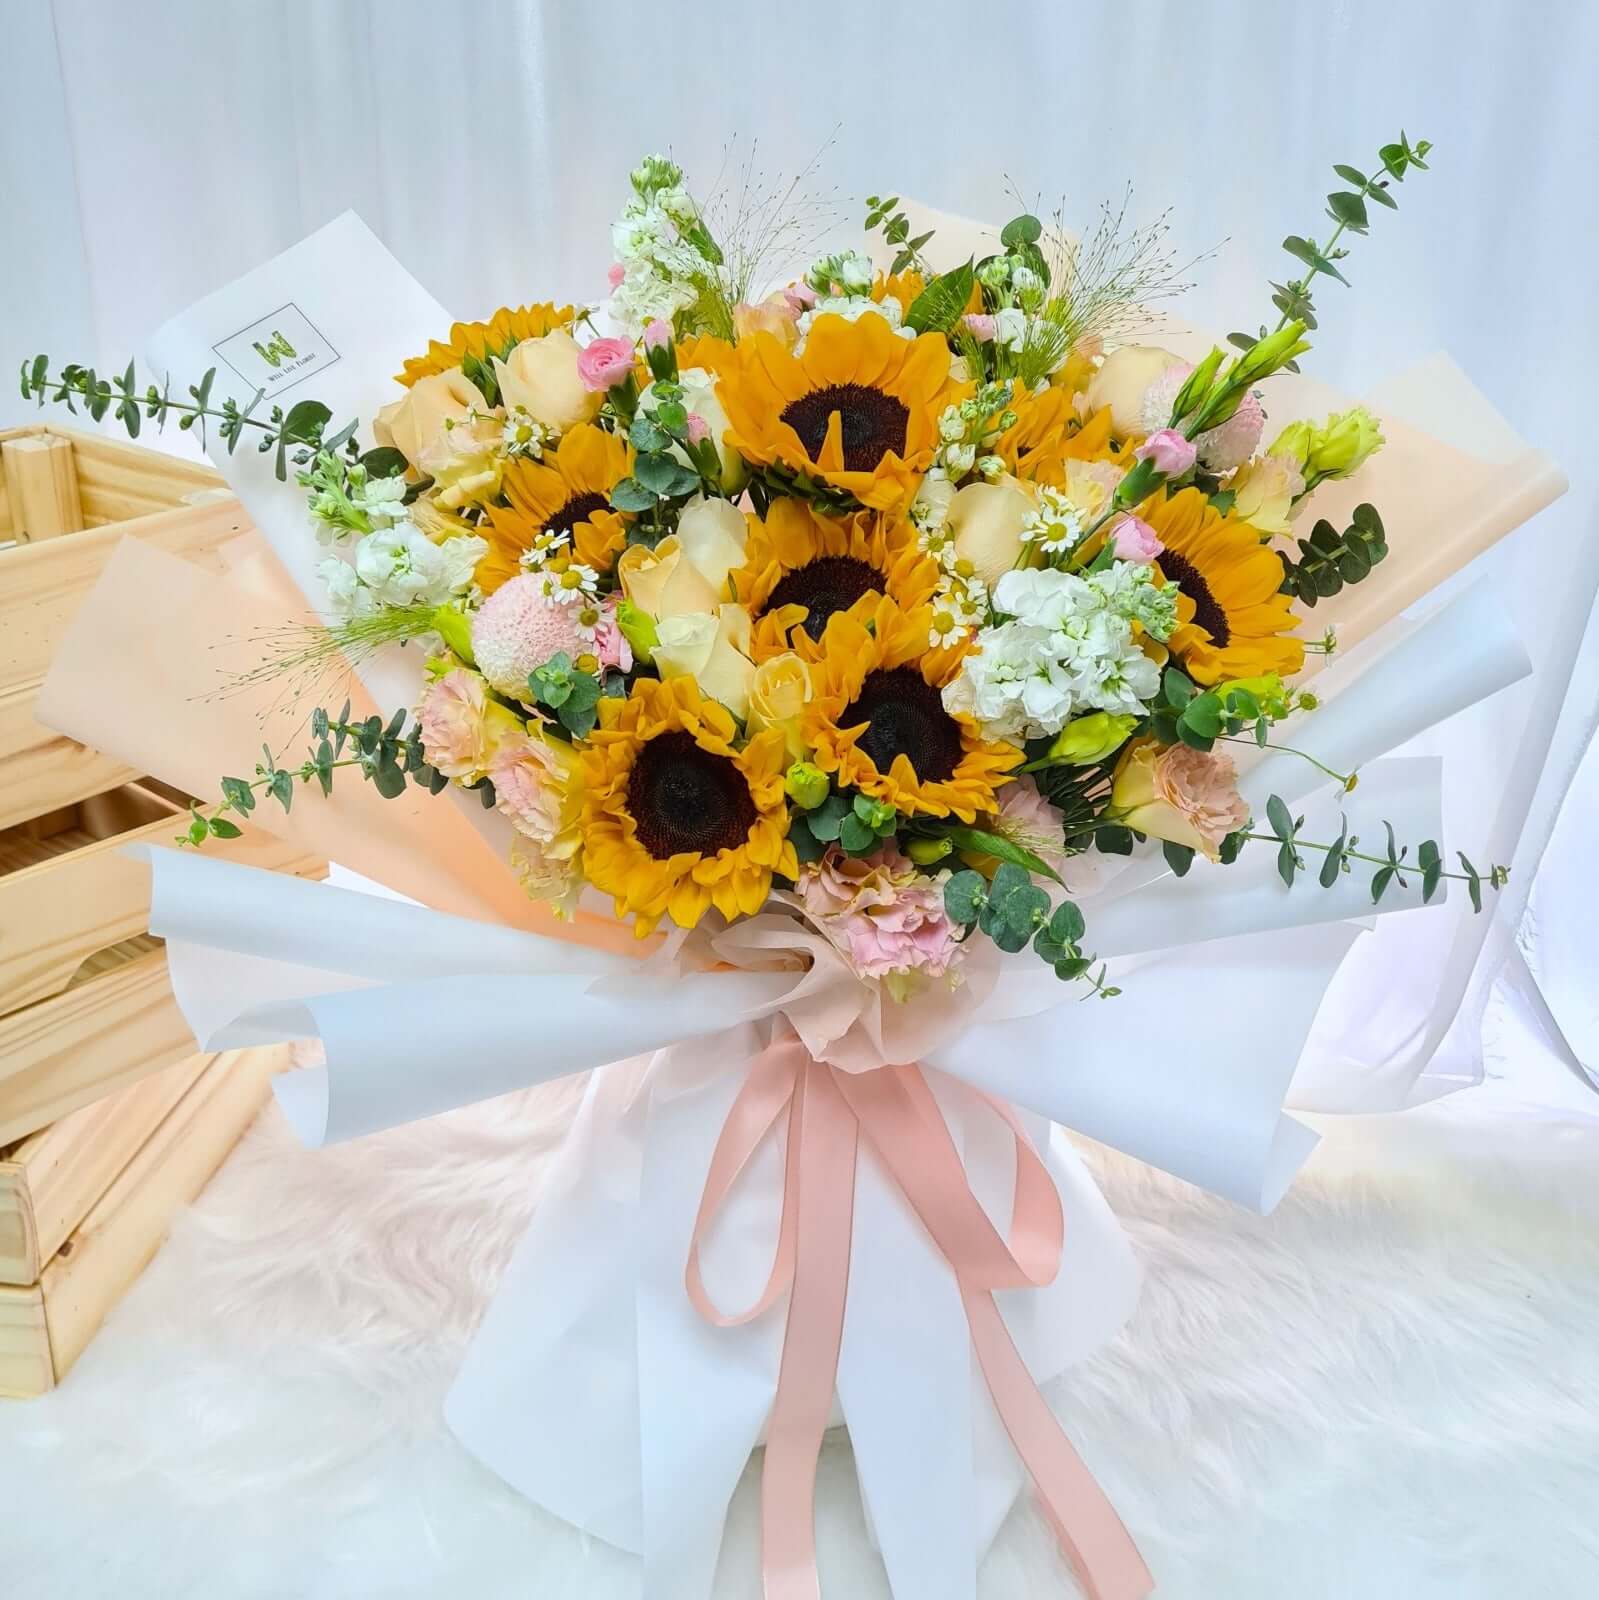 Choose the best flower shop to keep your flower fresh - Well Live Florist